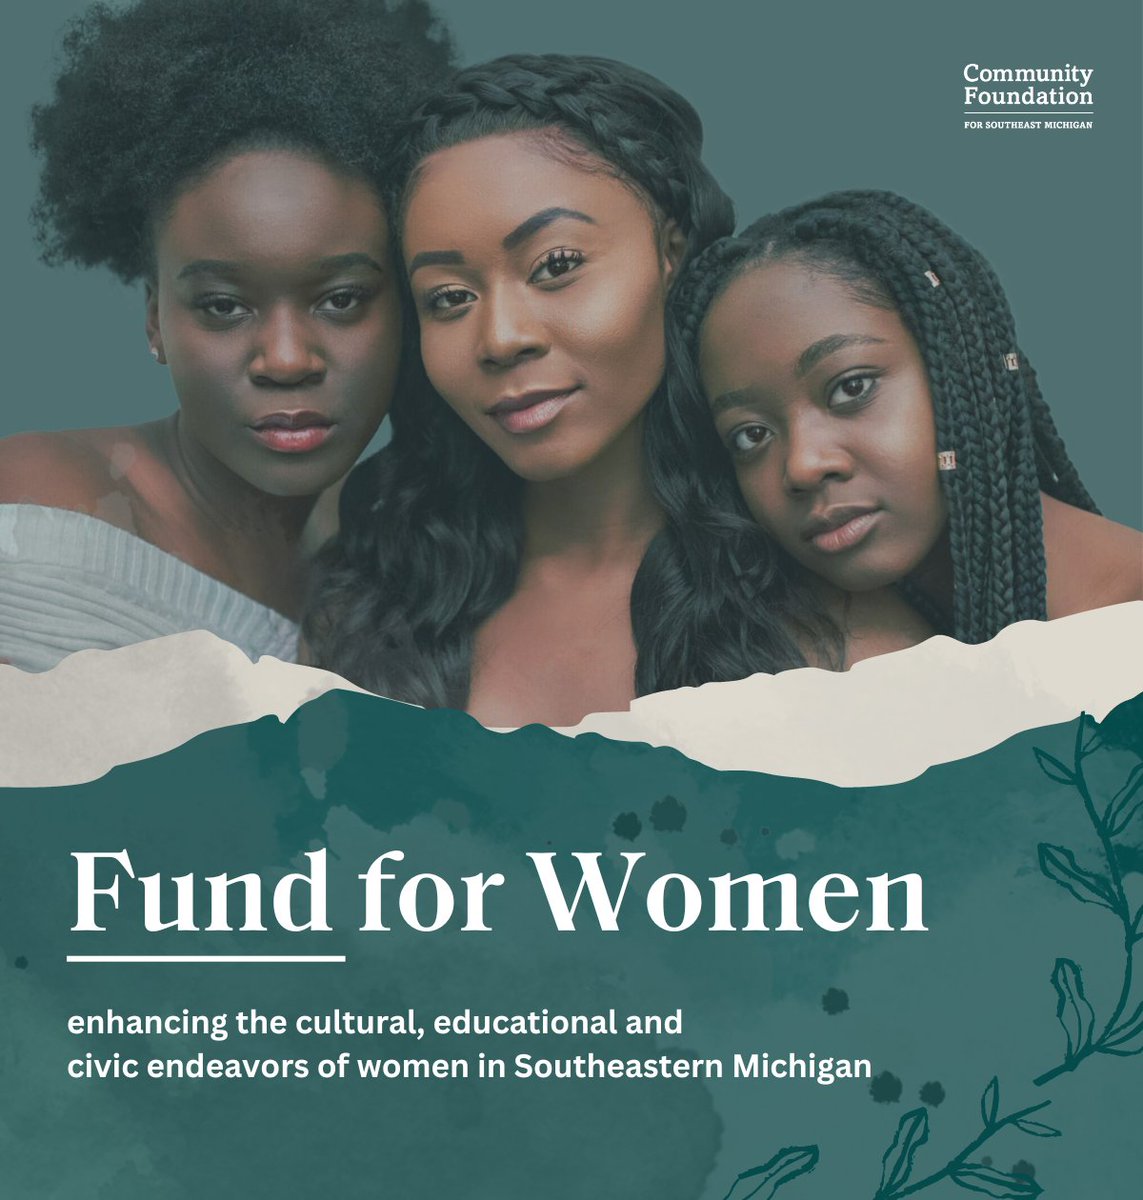 Did you know that less than 2% of philanthropic giving goes to women’s and girls' organizations? We are proud to partner with women-led nonprofits and programs that support women throughout southeastern Michigan and invite you to join us in this effort. cfsem.org/support-women